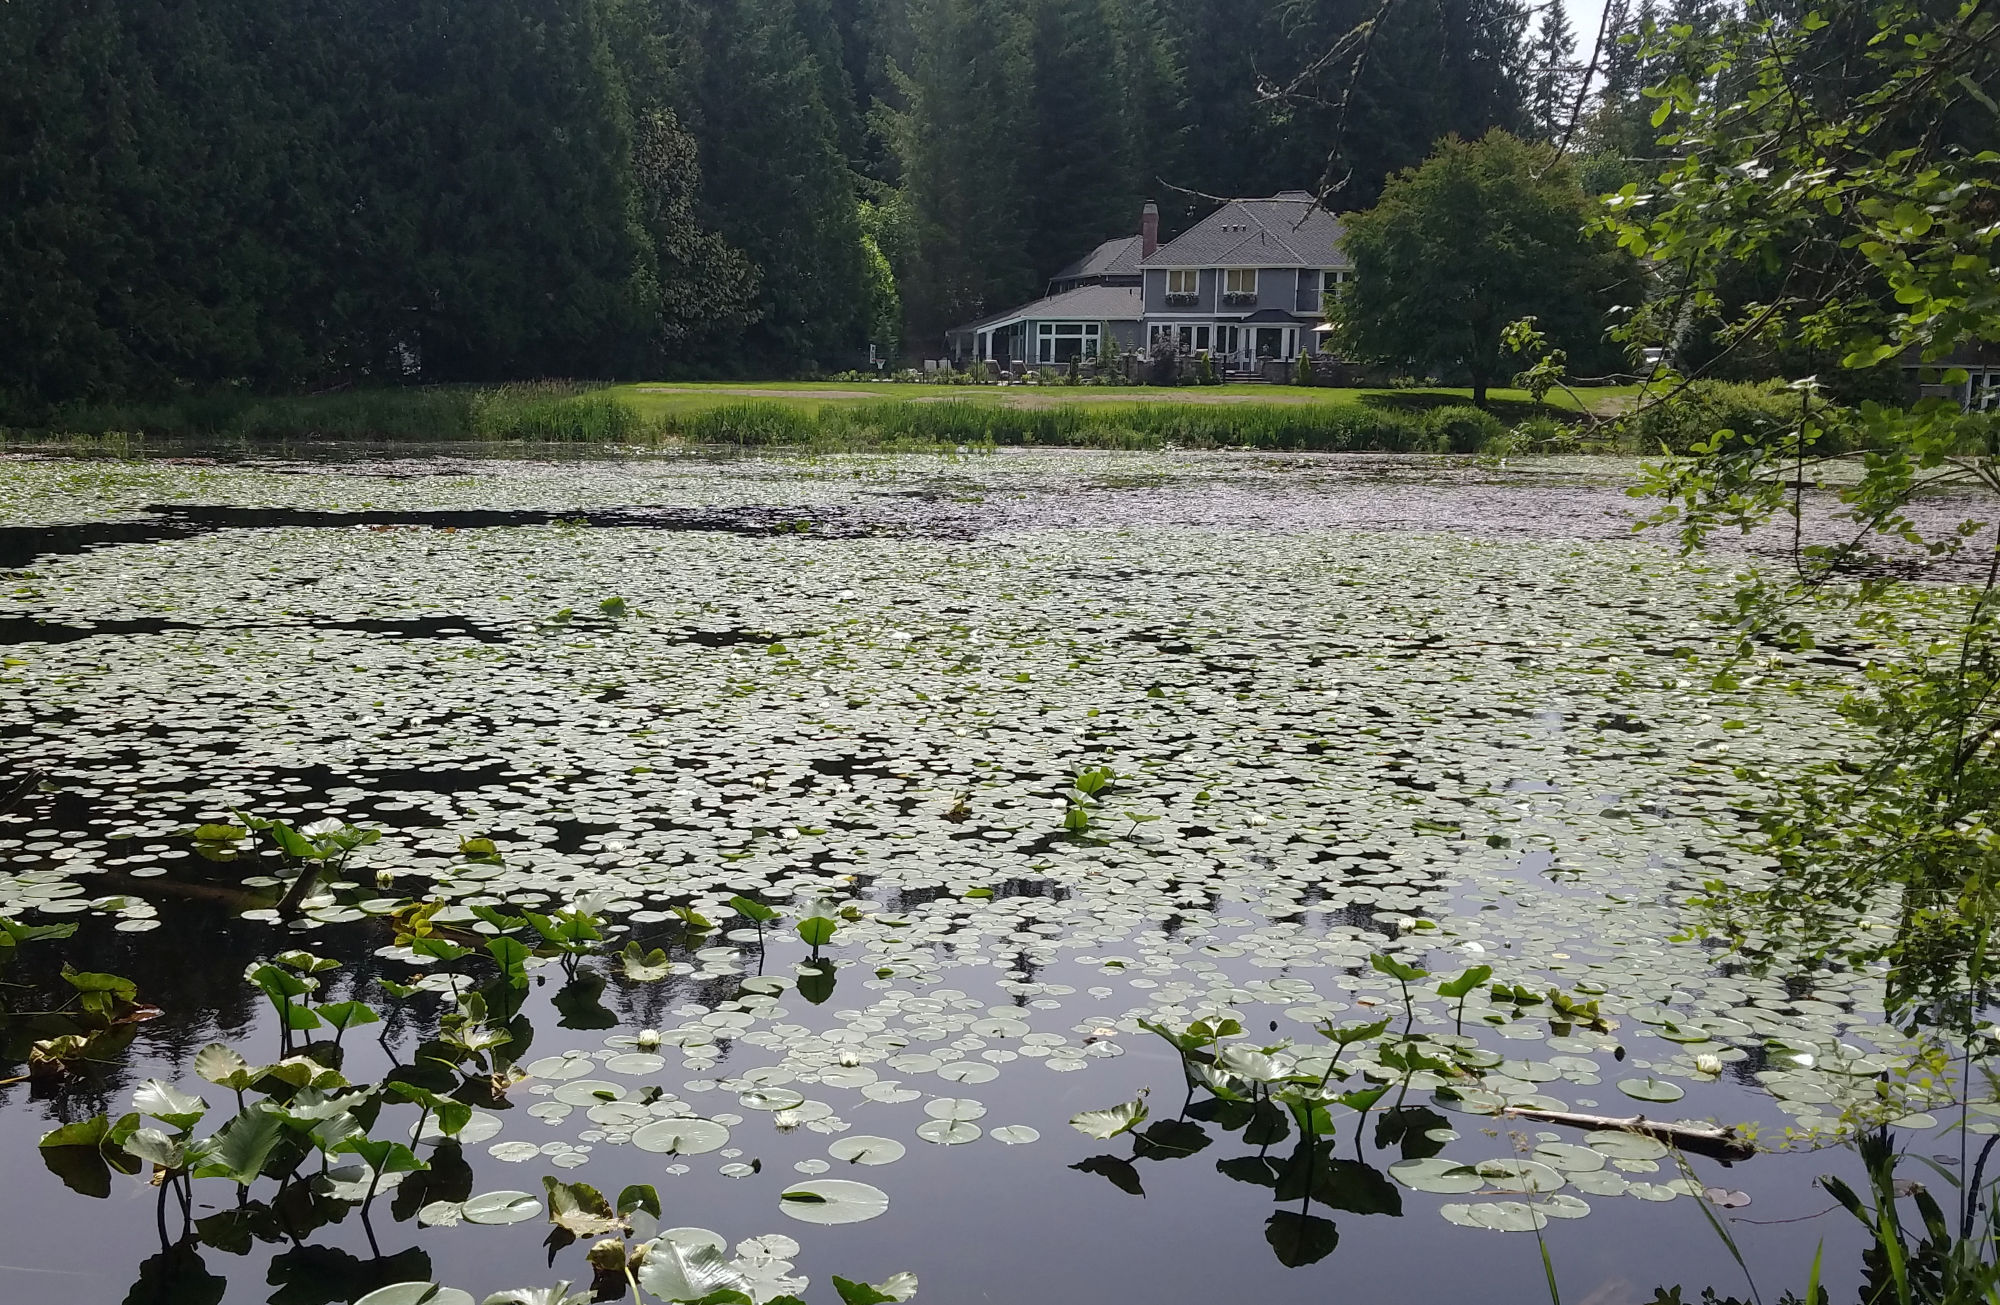 Beaver Lake in Sammamish covered in lilies, with evergreen trees and two-story house in the background.